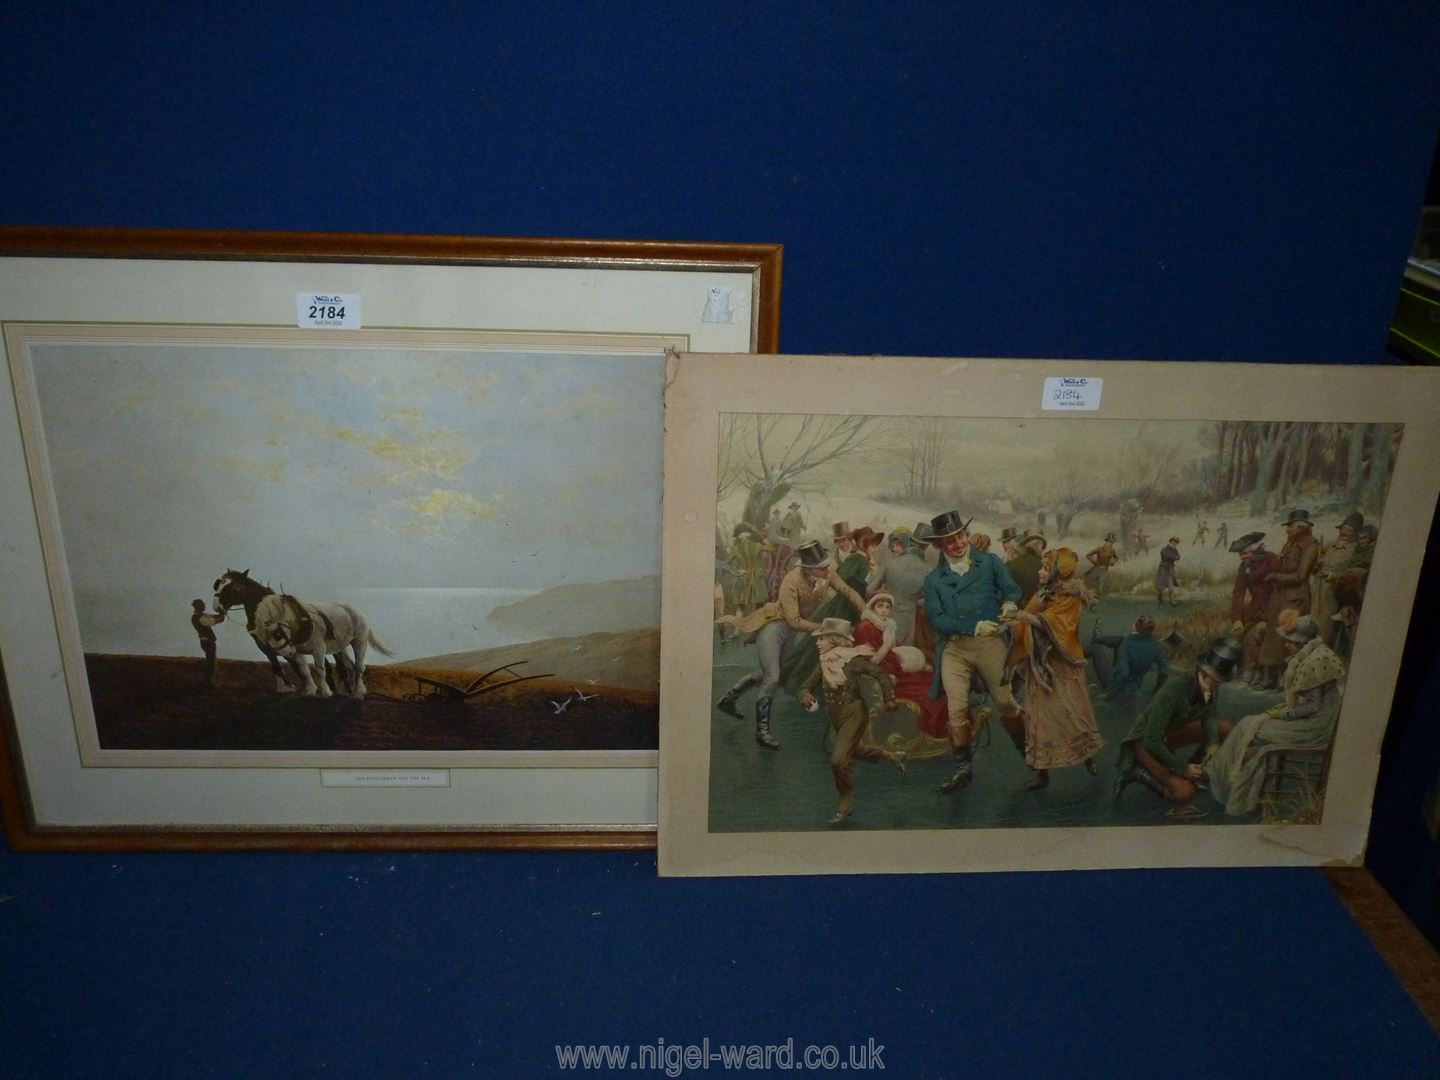 A framed print of a Ploughman and the Sea.